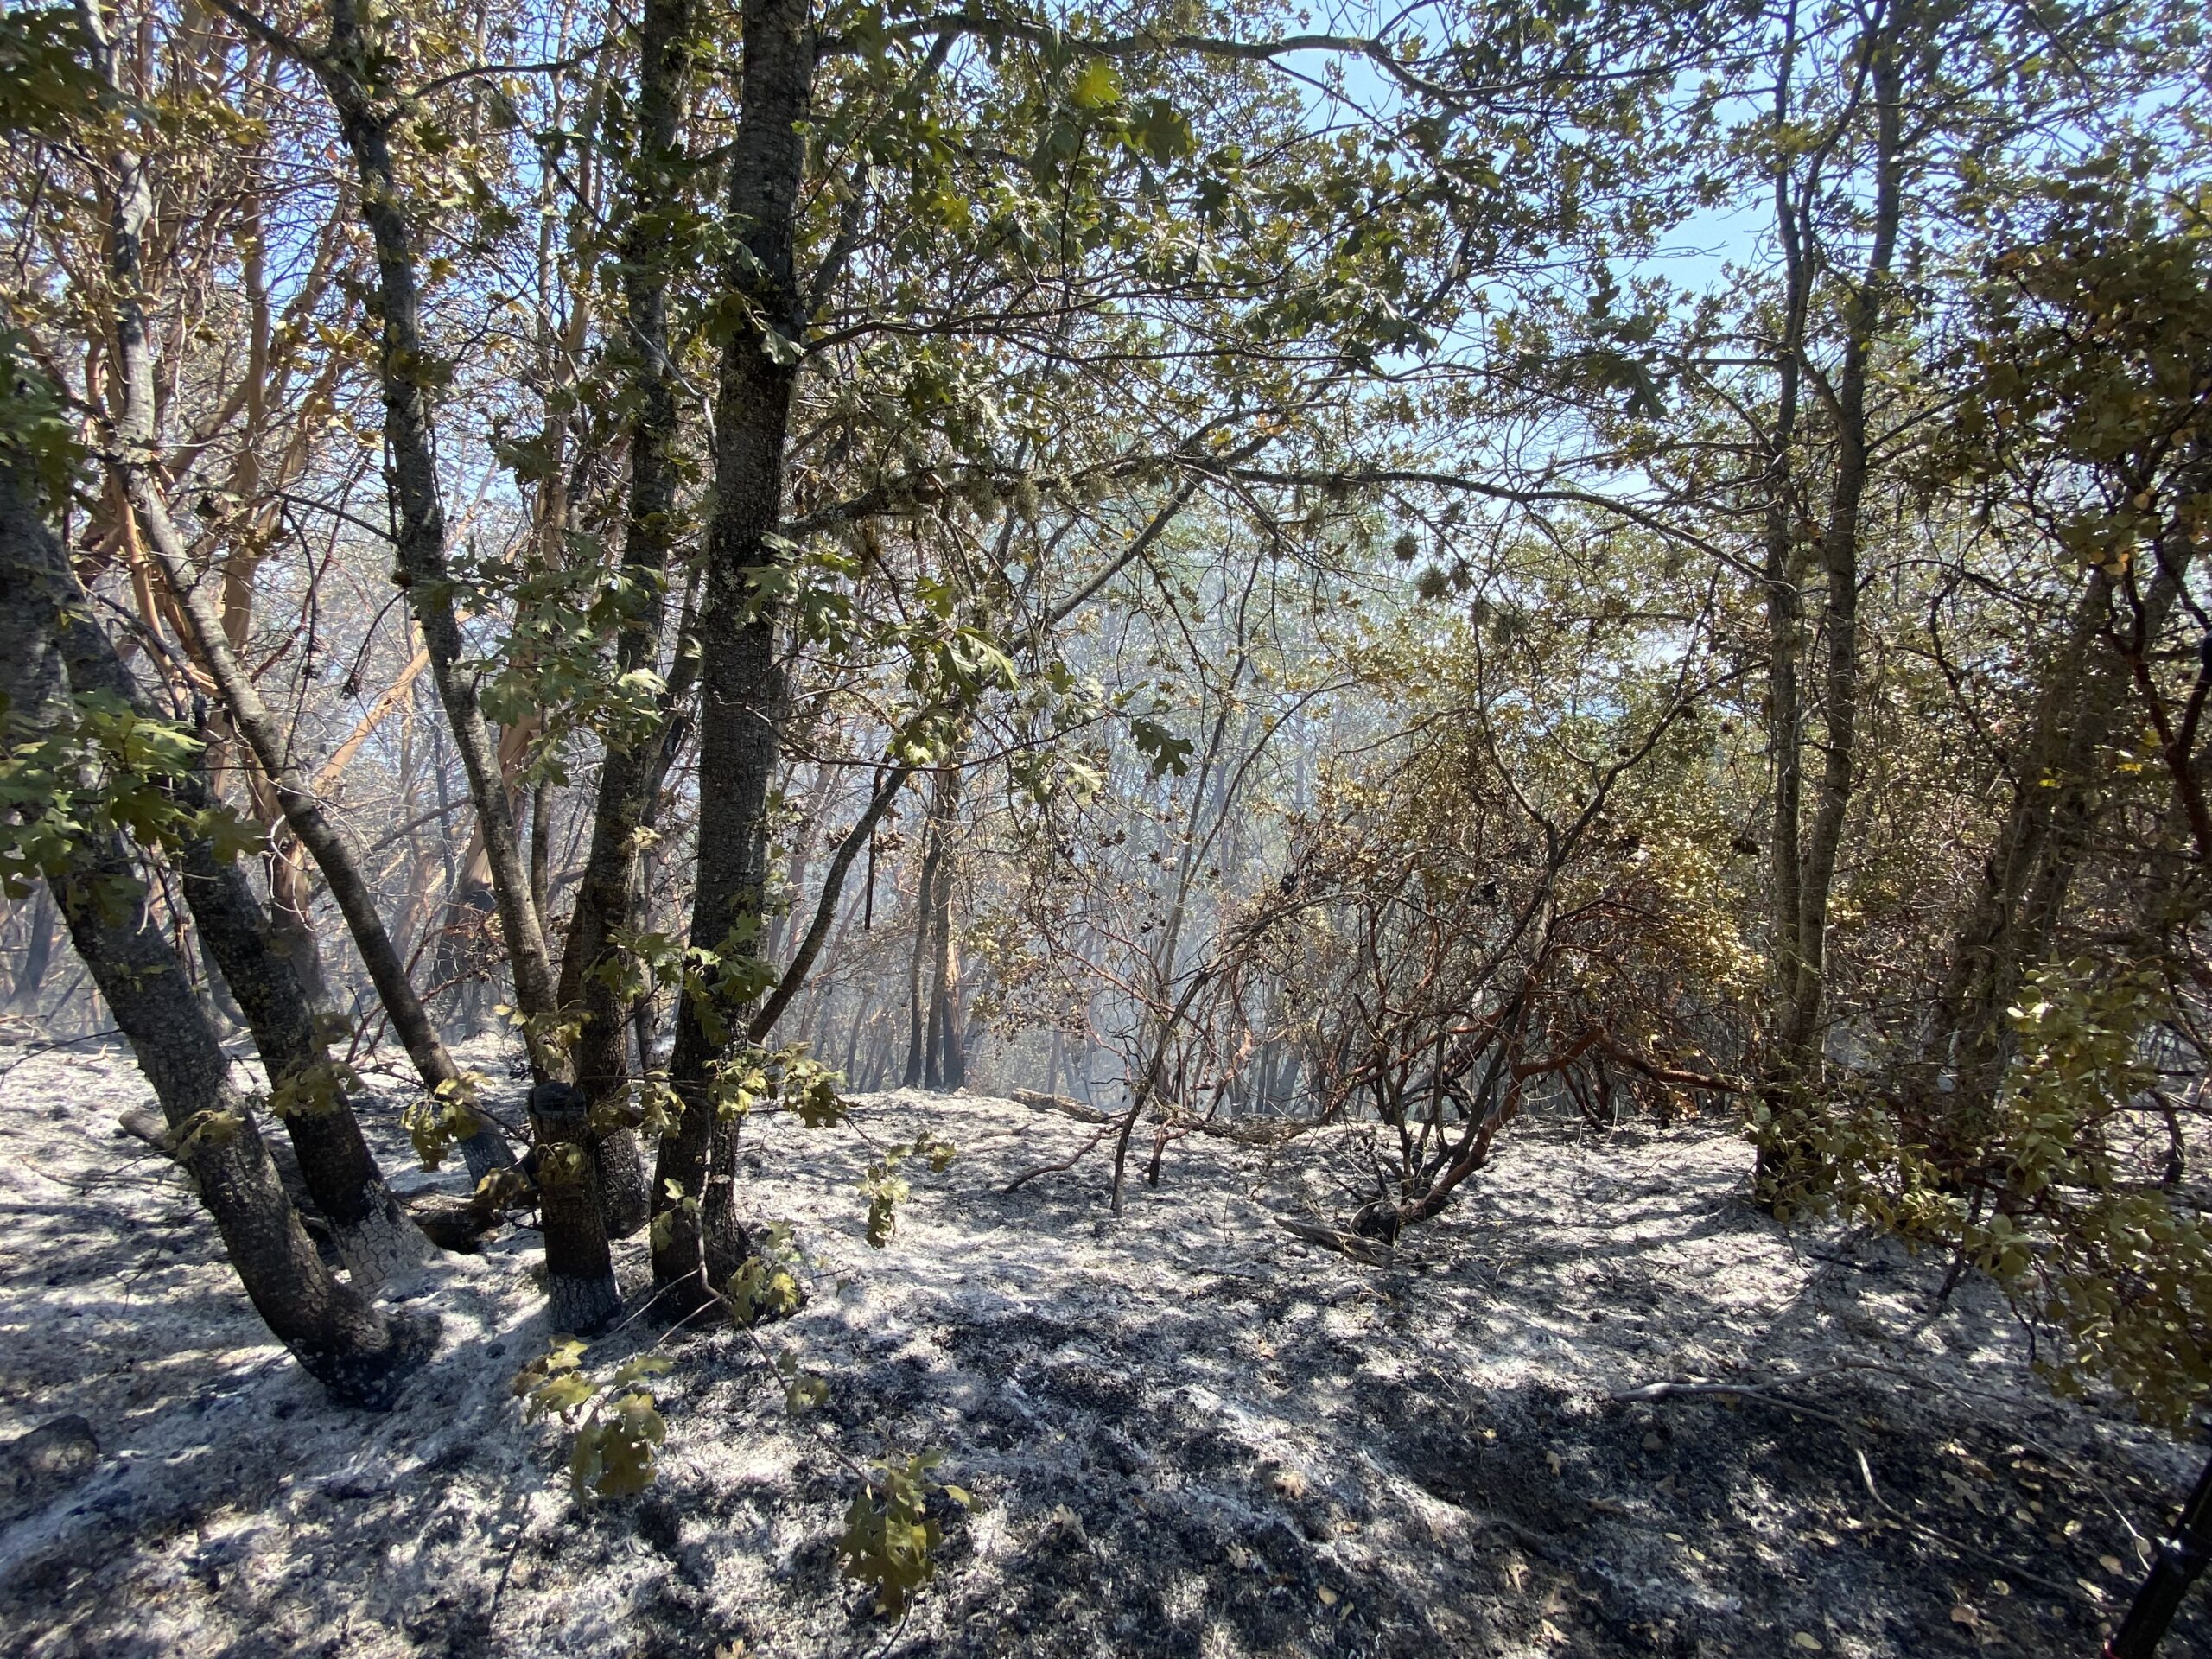 The Wards Creek Fire